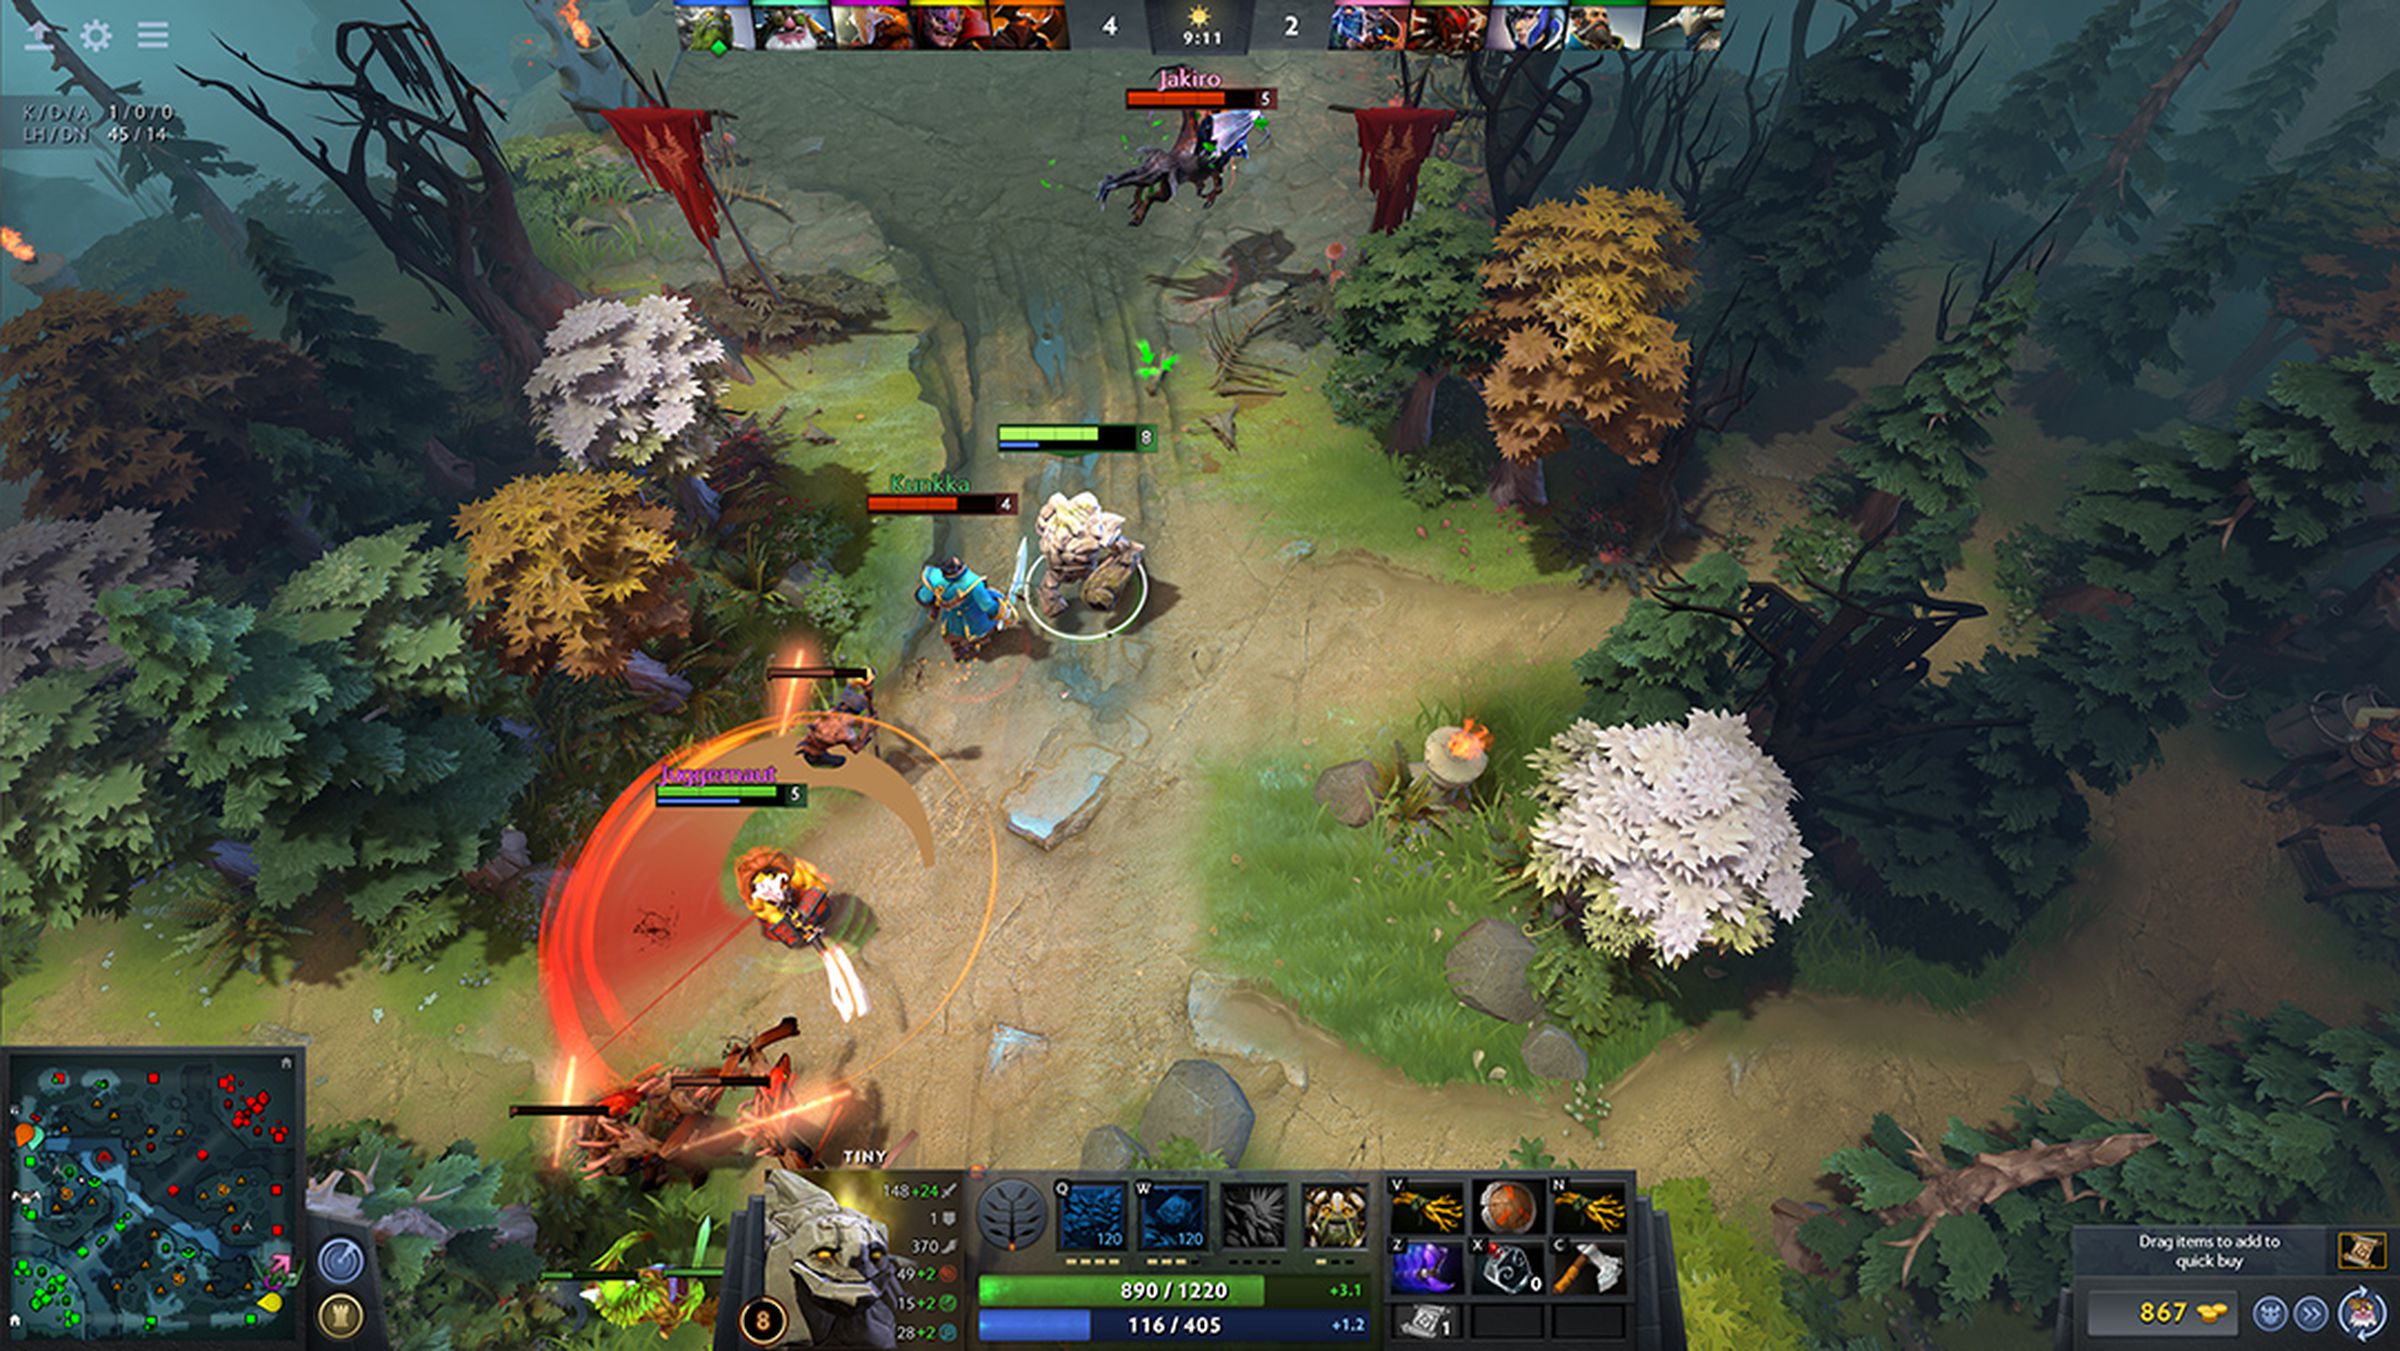 A screenshot of Dota 2, a fantasy arena battle game where two teams of five heroes fight to destroy one another’s base. Gameplay is complex, and matches typically last more than 30 minutes. 